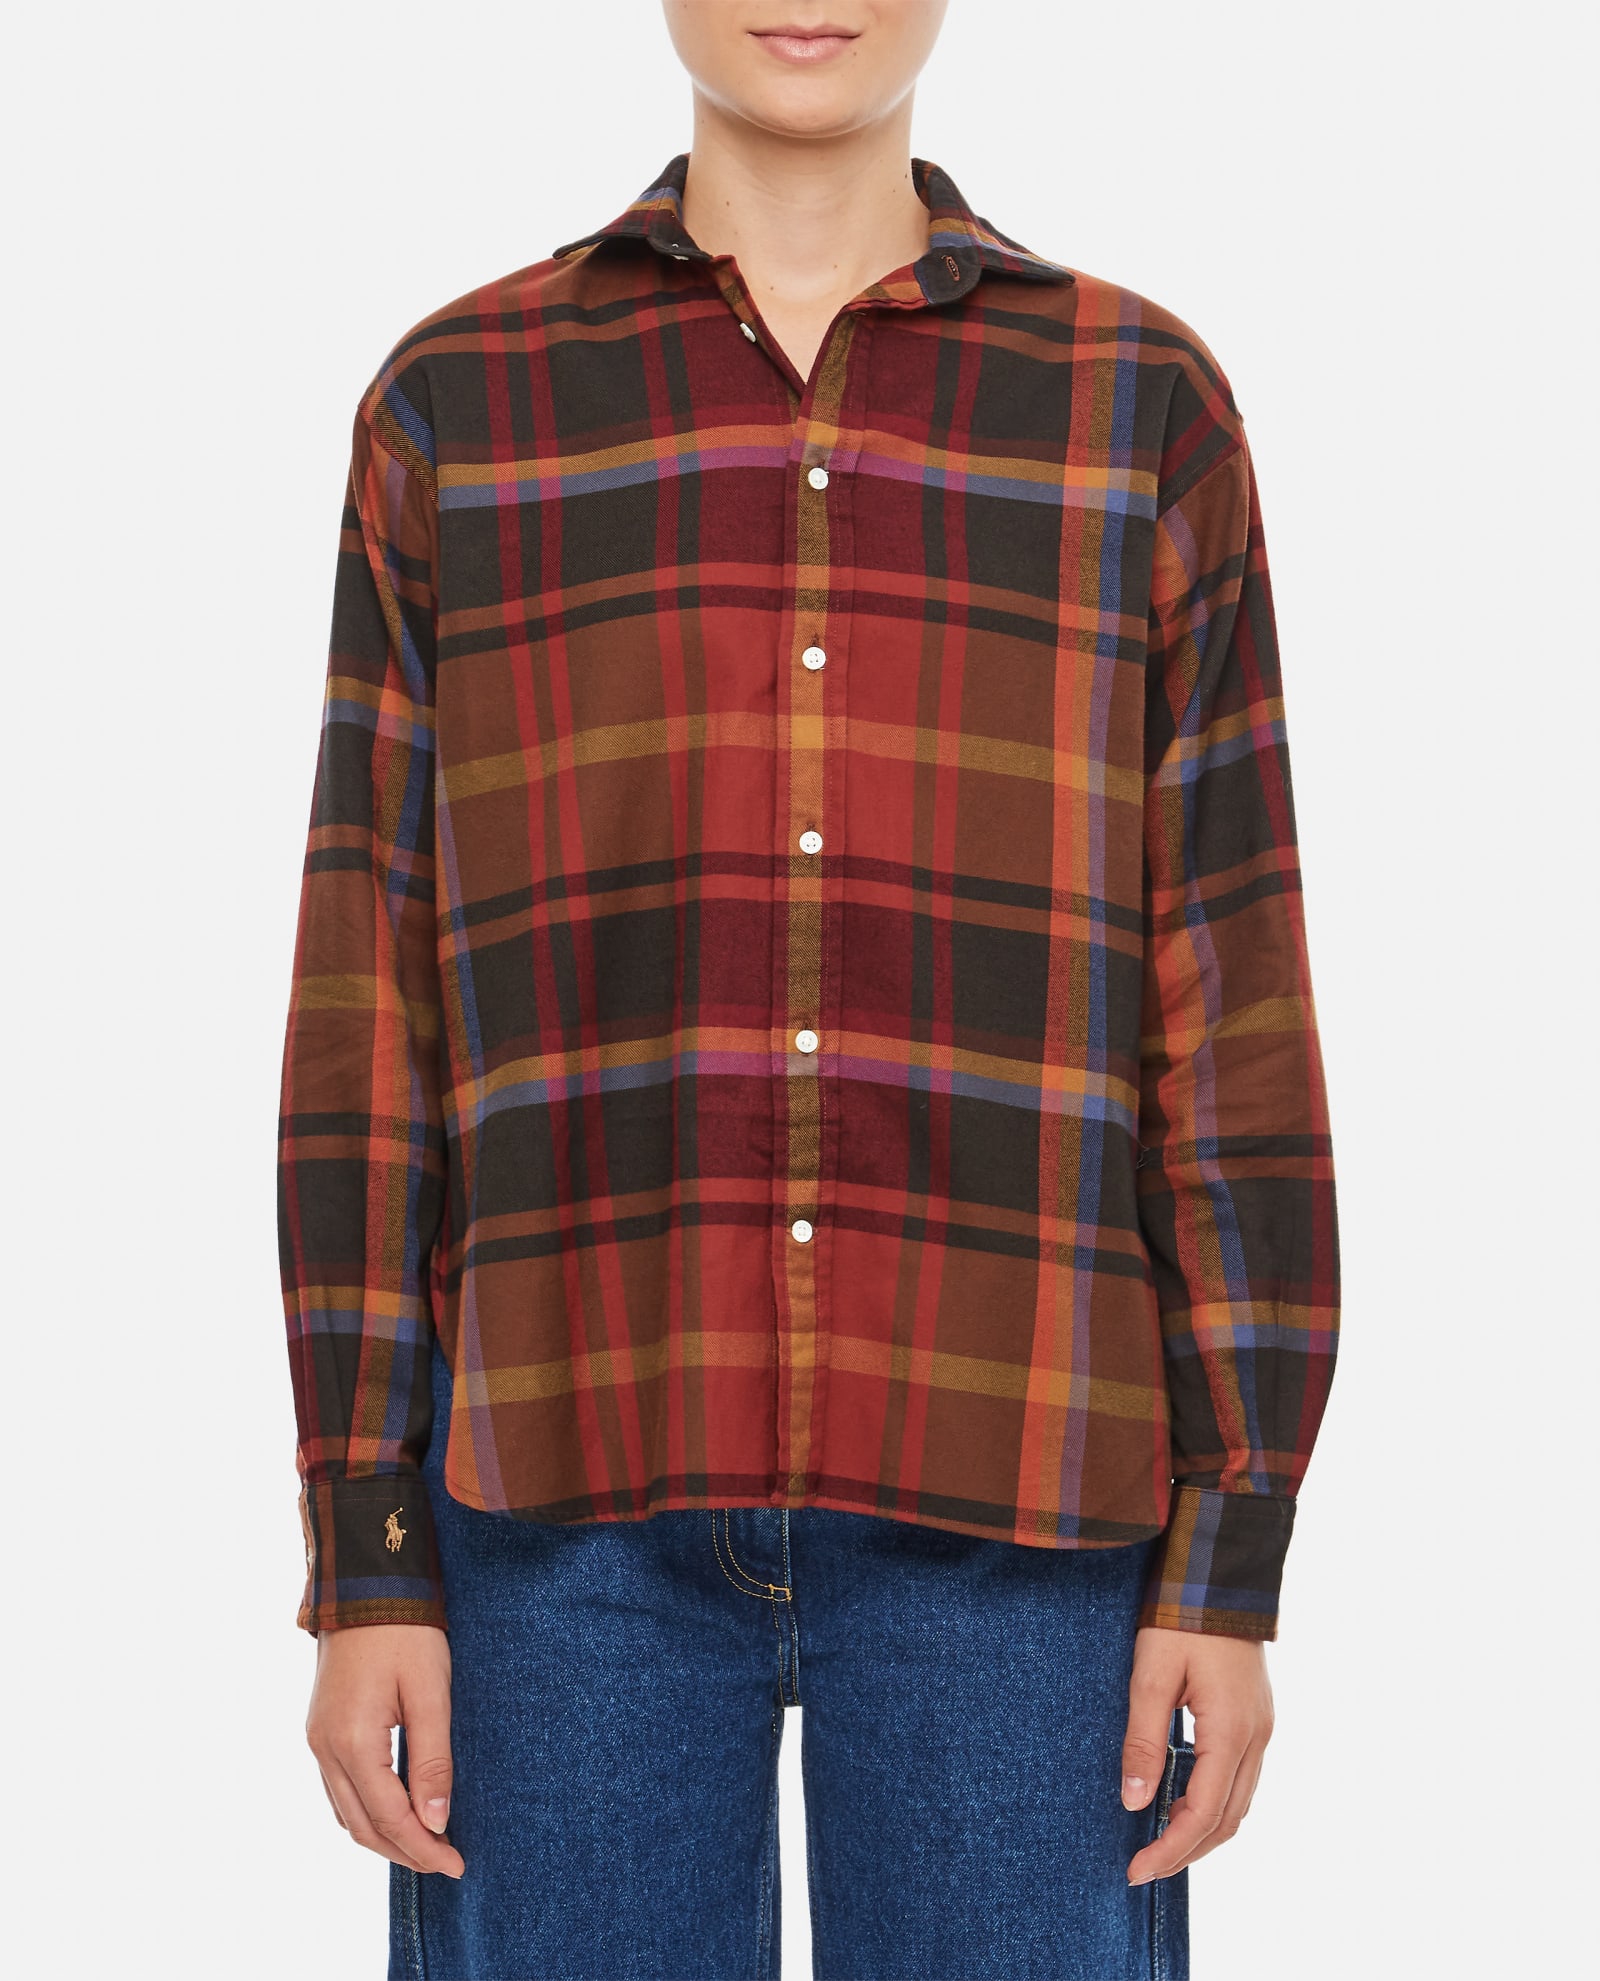 Ralph Lauren Long Sleeve Button Front Shirt In Red Multi Fall Plaid